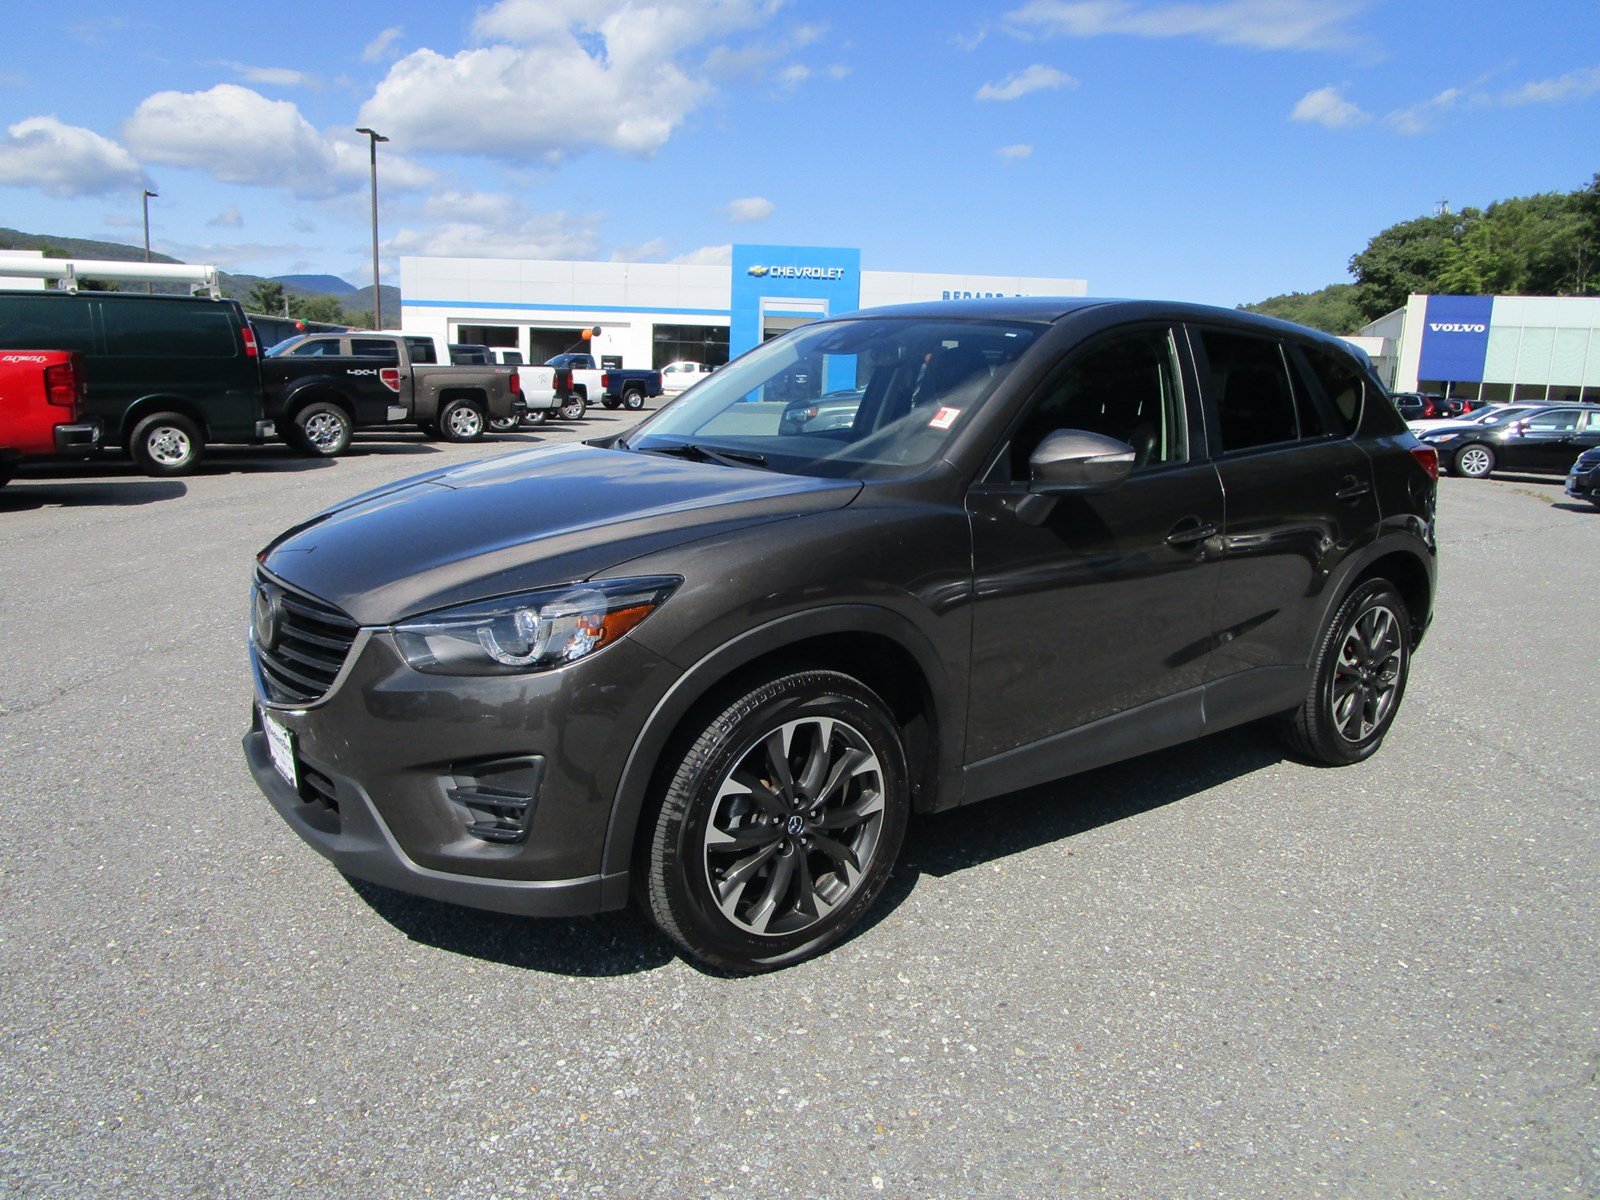 Used Mazda Cx Grand Touring For Sale In Cheshire Ma